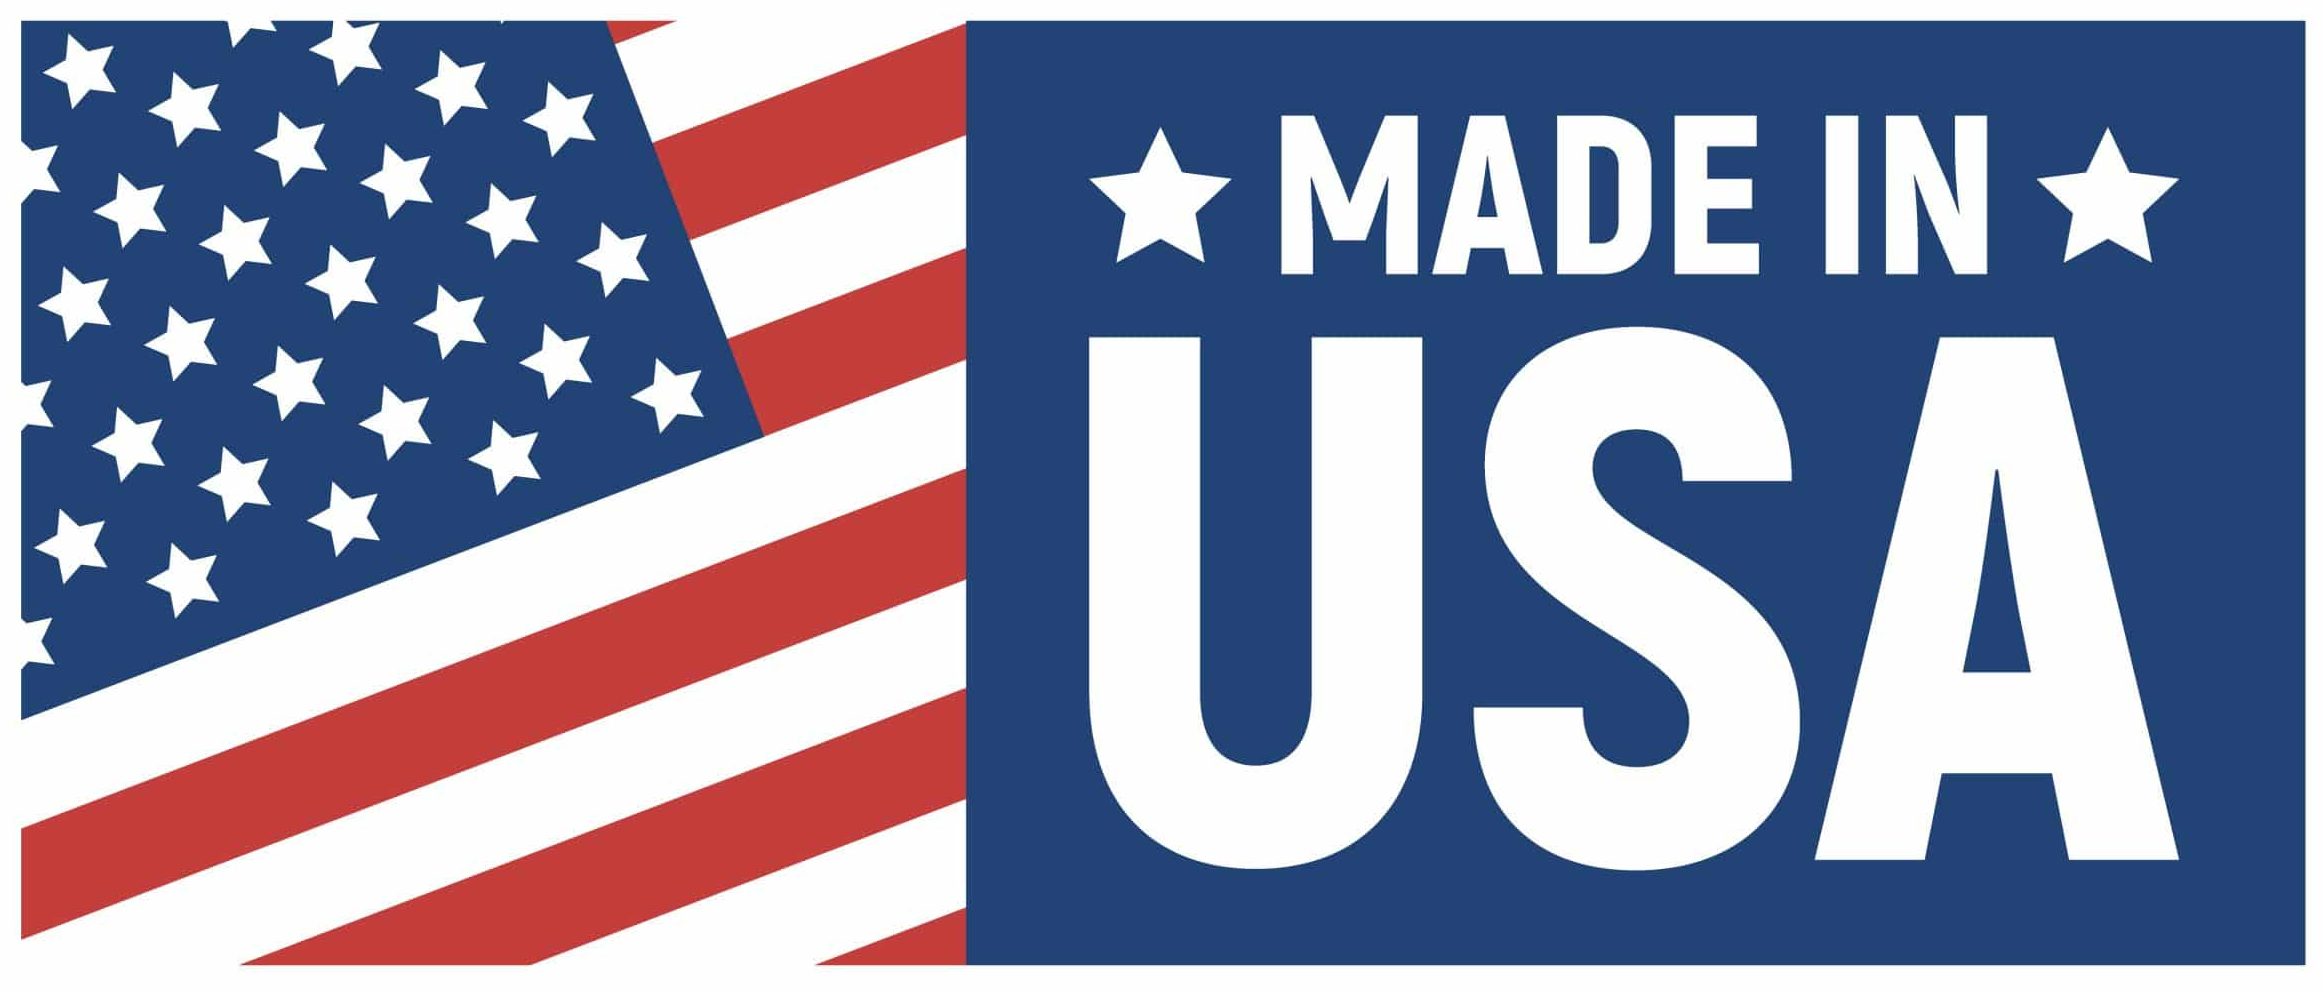 Made in USA label